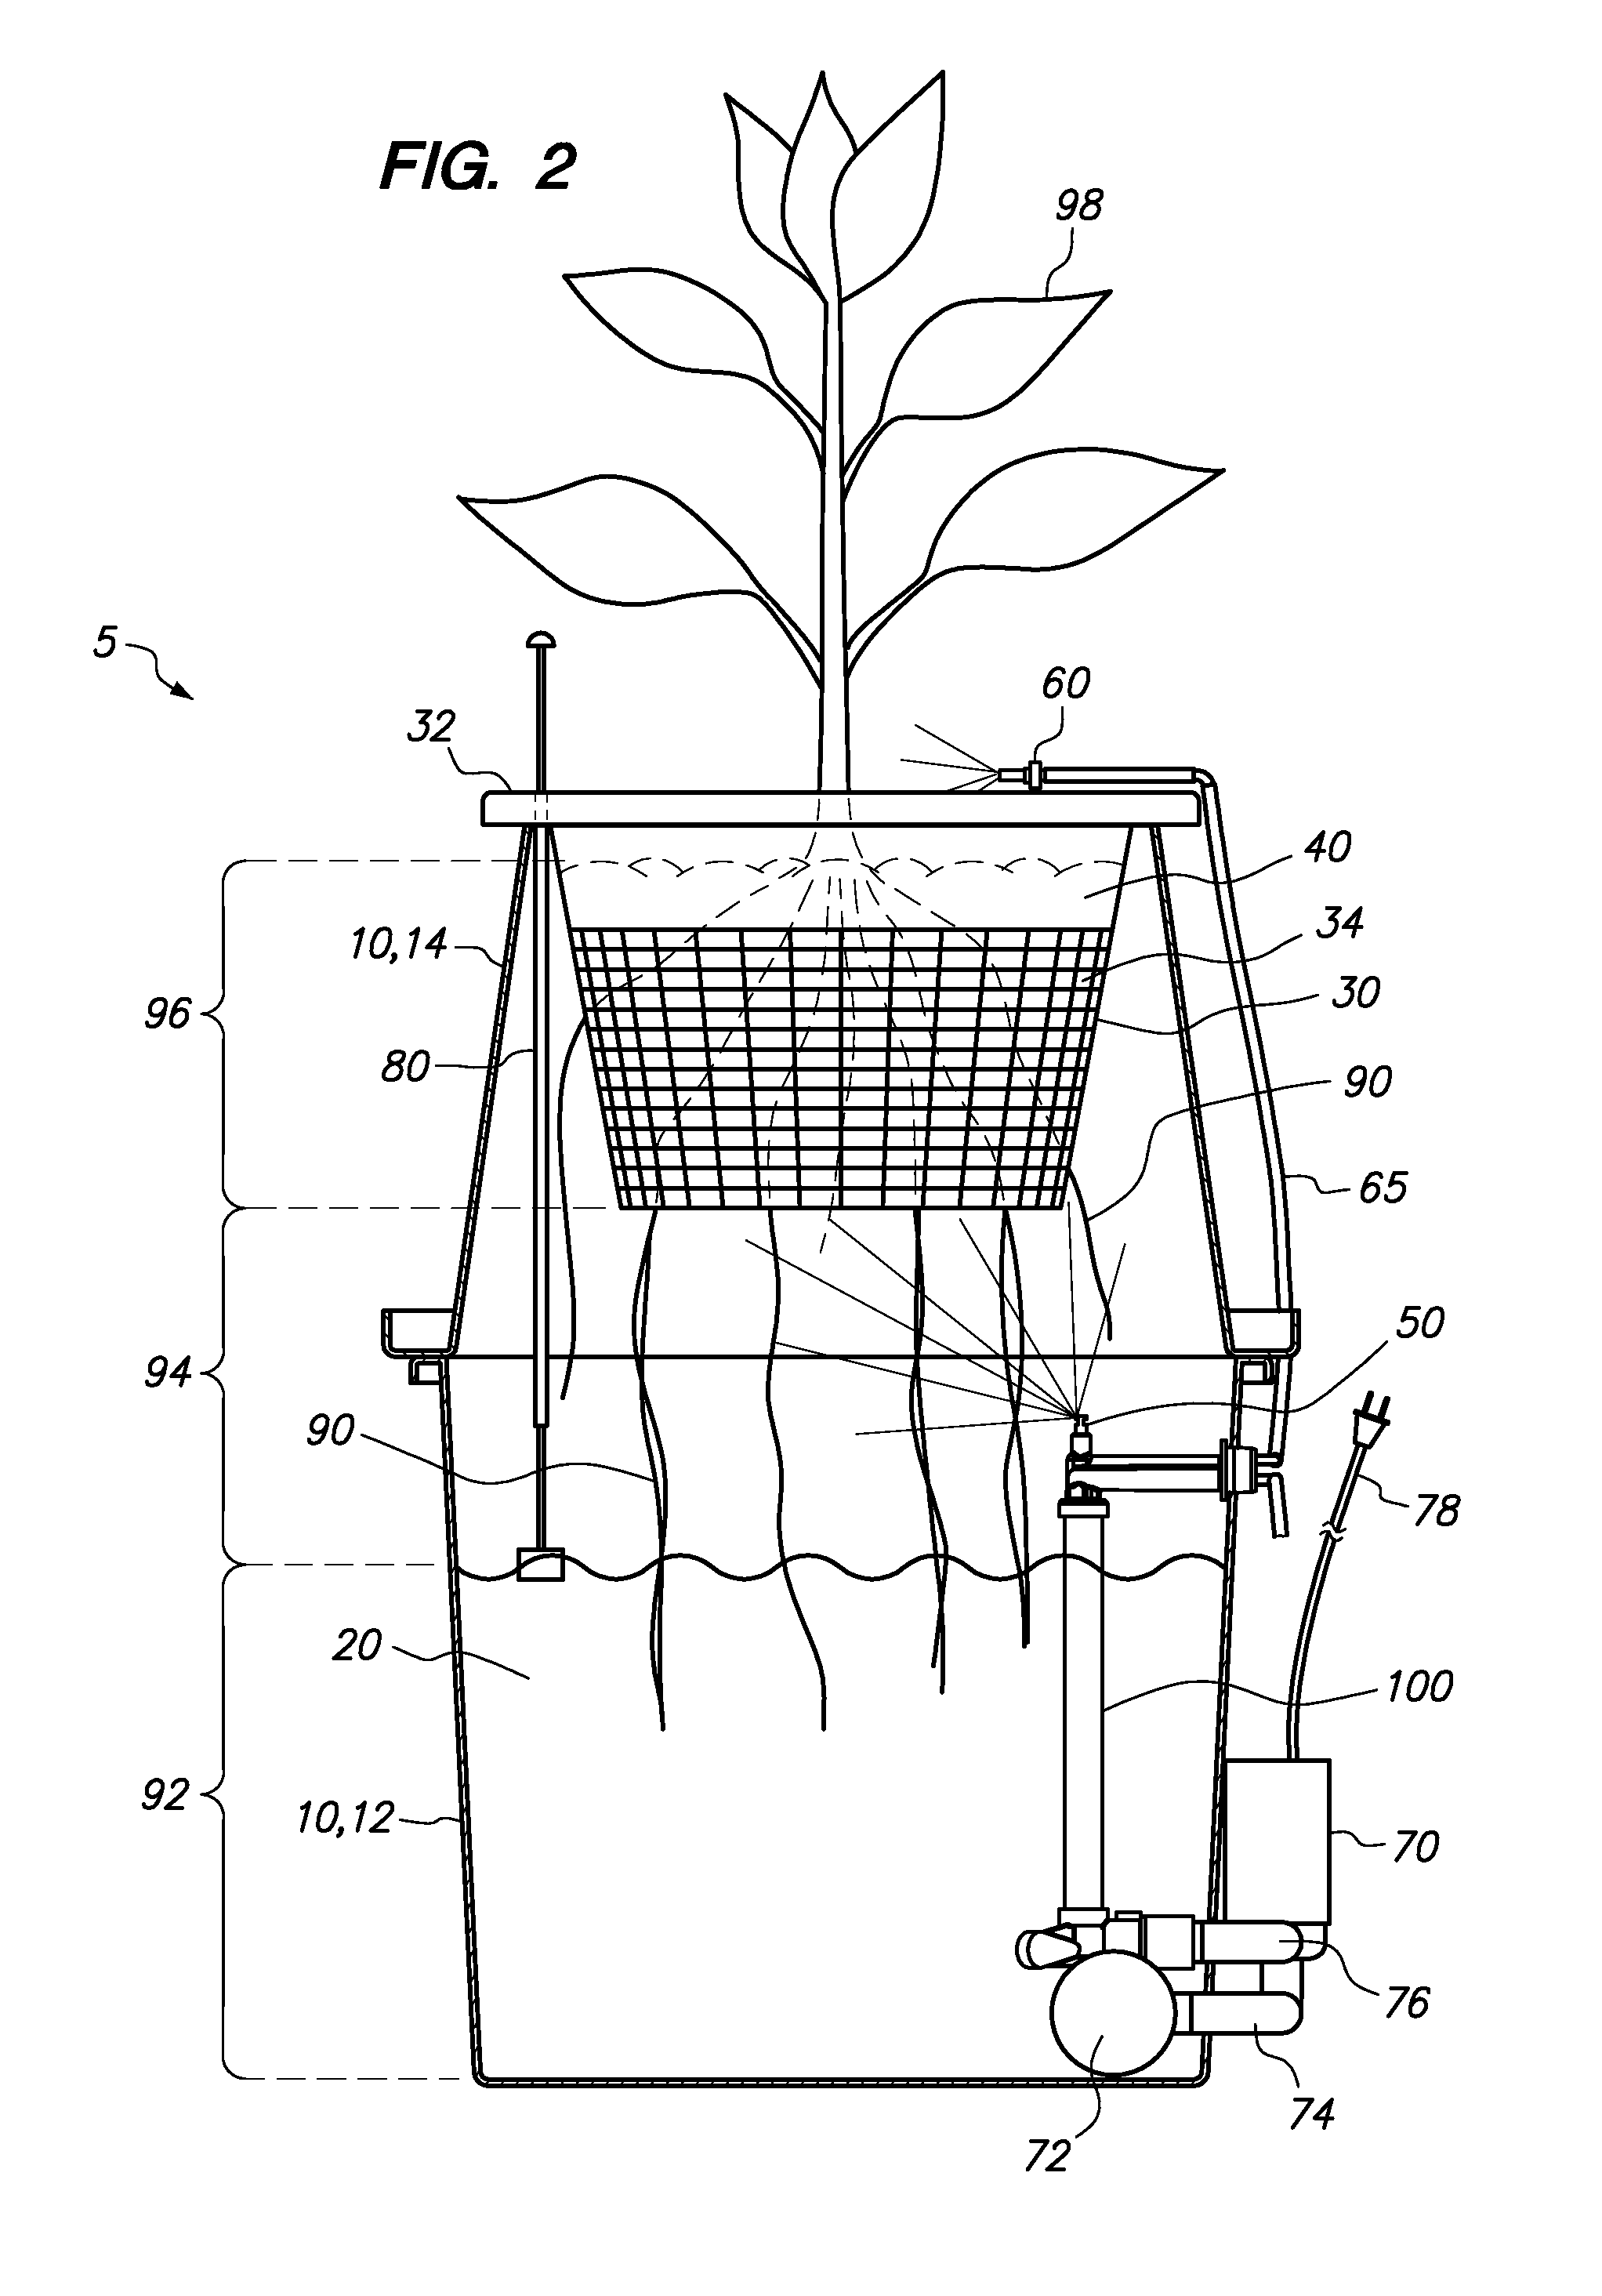 Hydroponic plant container with highly oxygenated nutrient solution using continuous air injection and continuous coriolis effect mixing